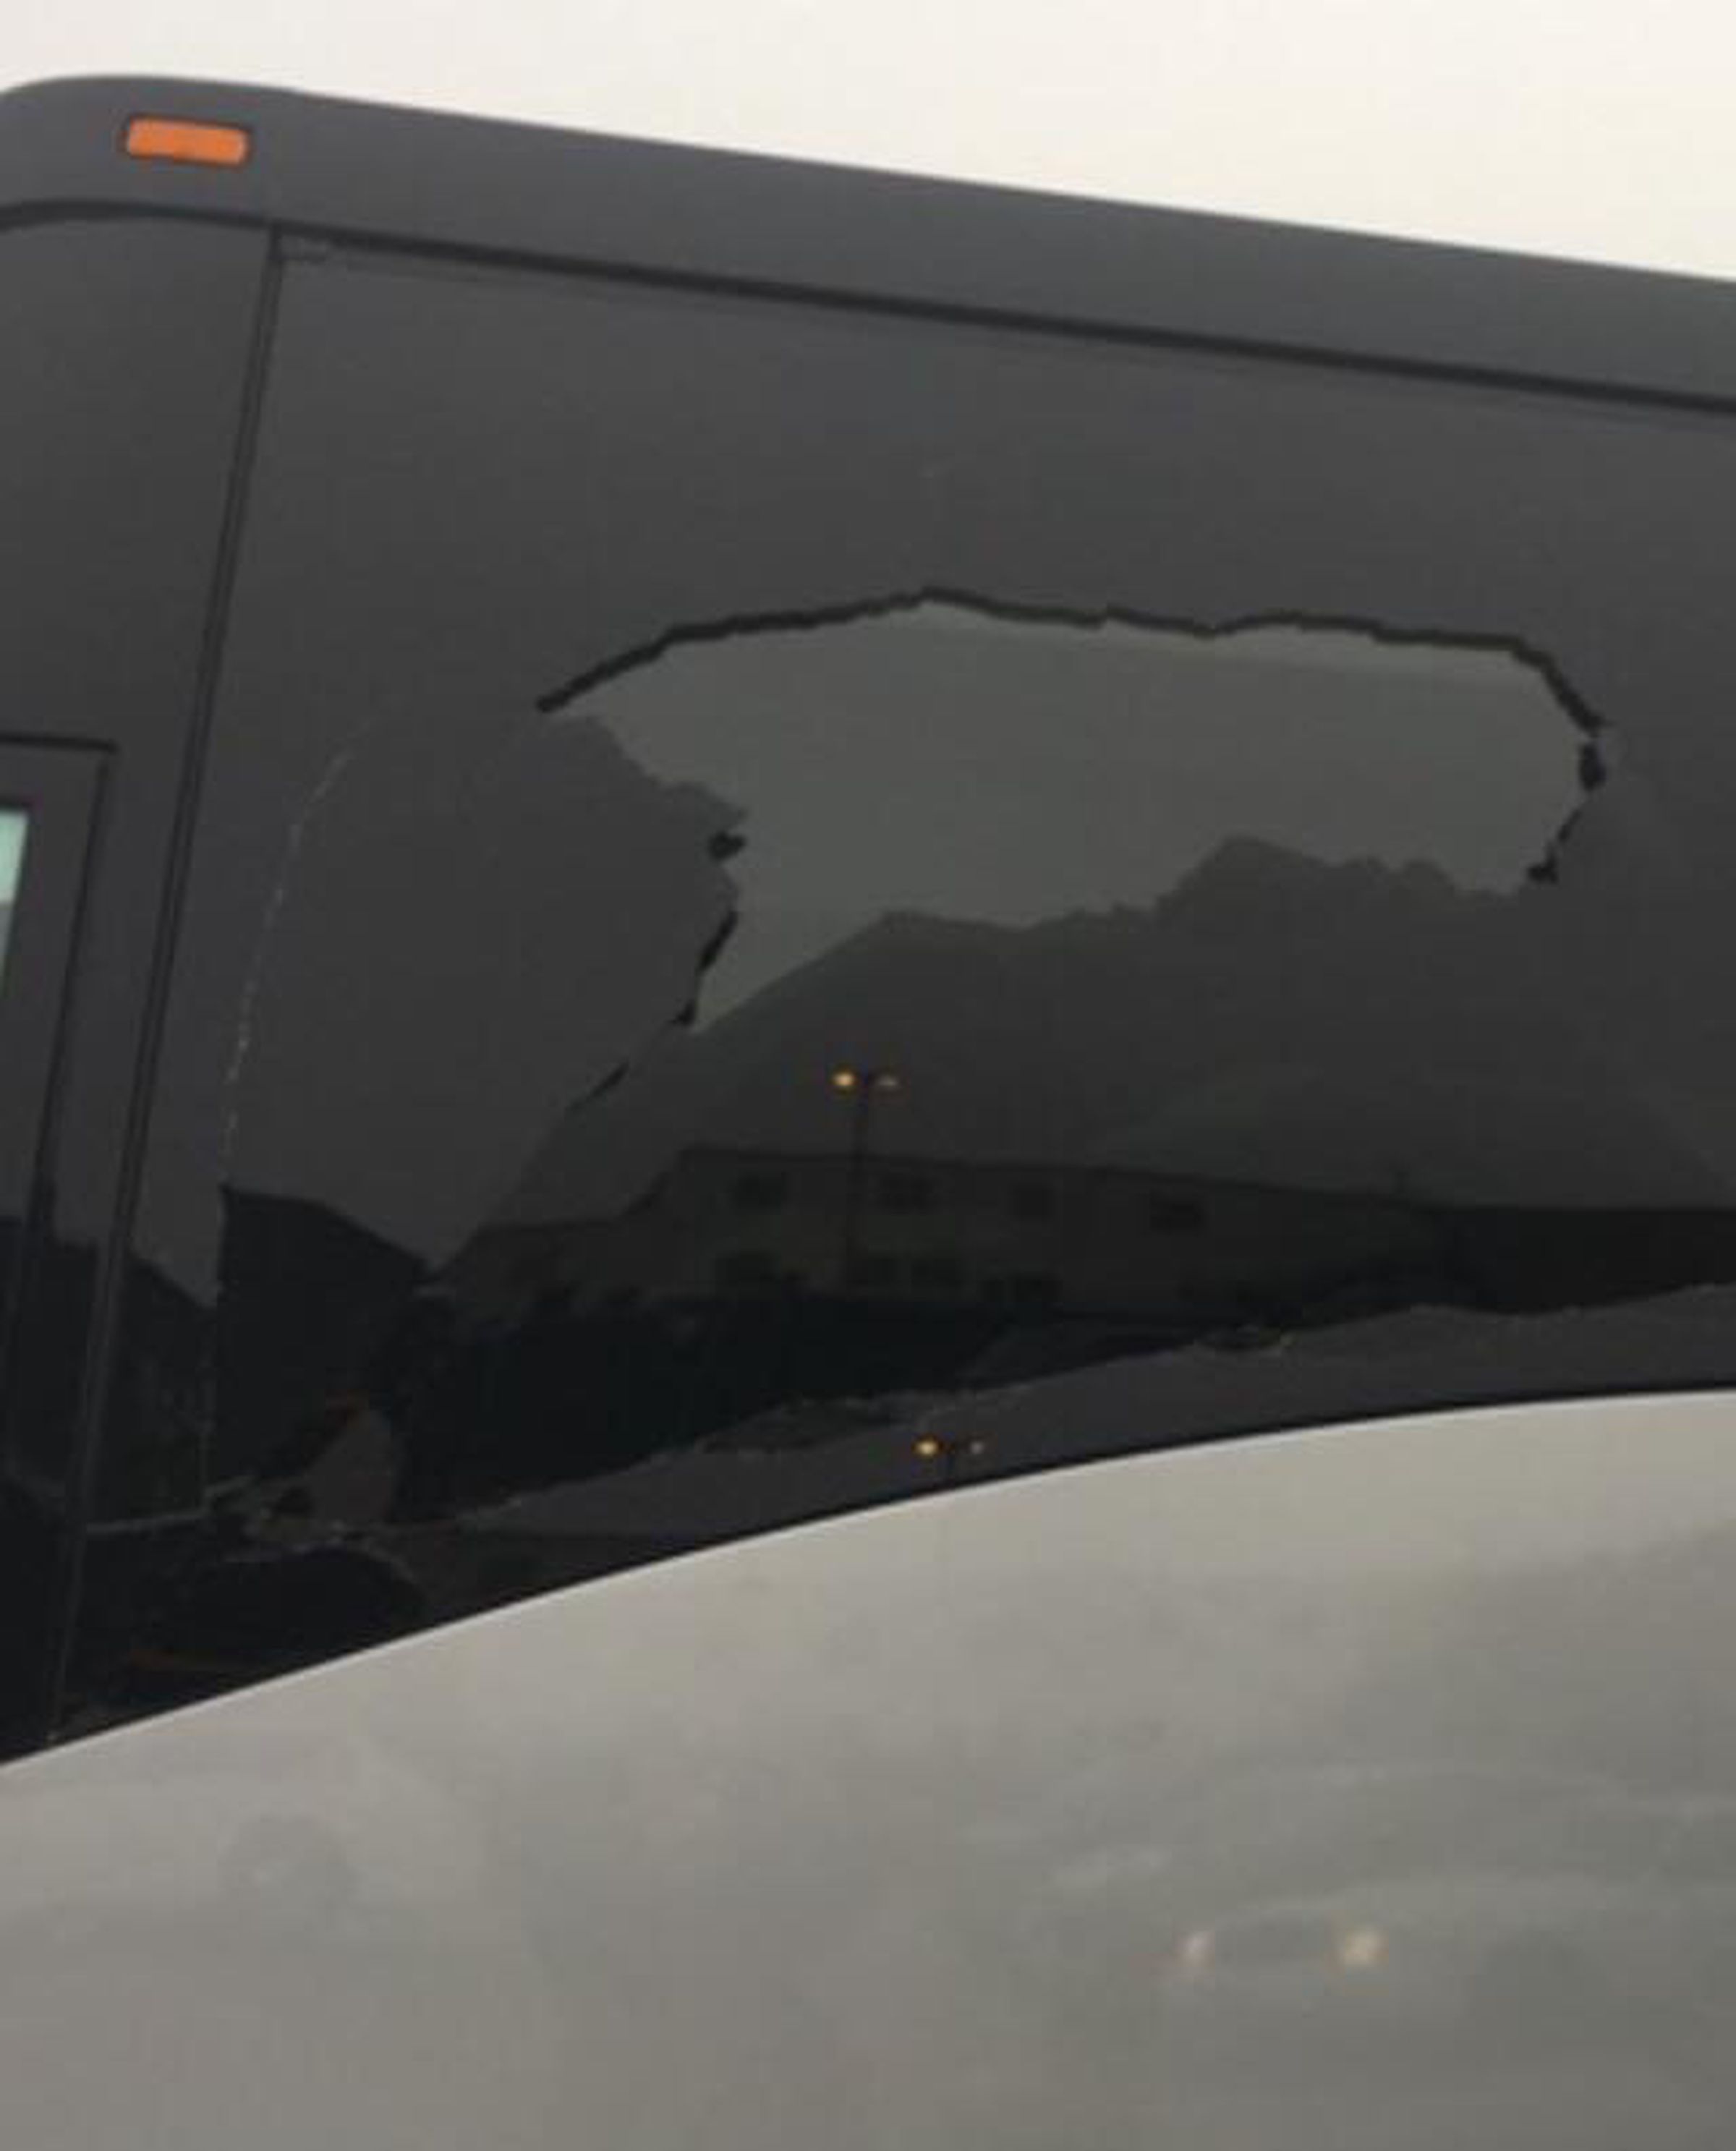 Damage to a company bus from a BB gun